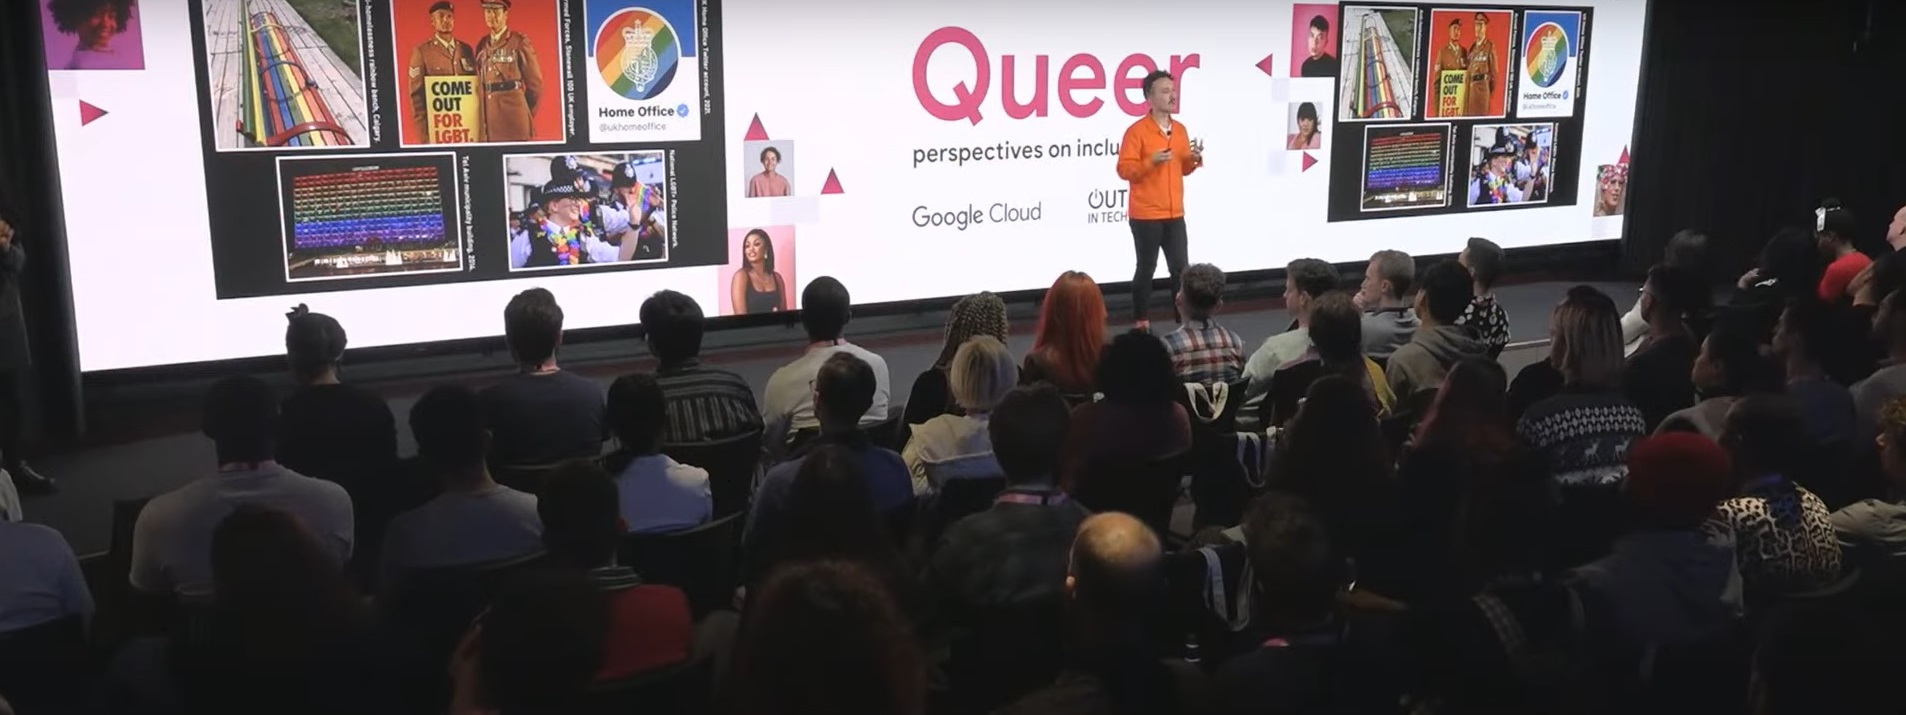 Kevin standing on a stage at a Google Cloud event. He is wearing an orange jacket and black jeans. On the screen behind it says: Queer perspectives on inclusive data.